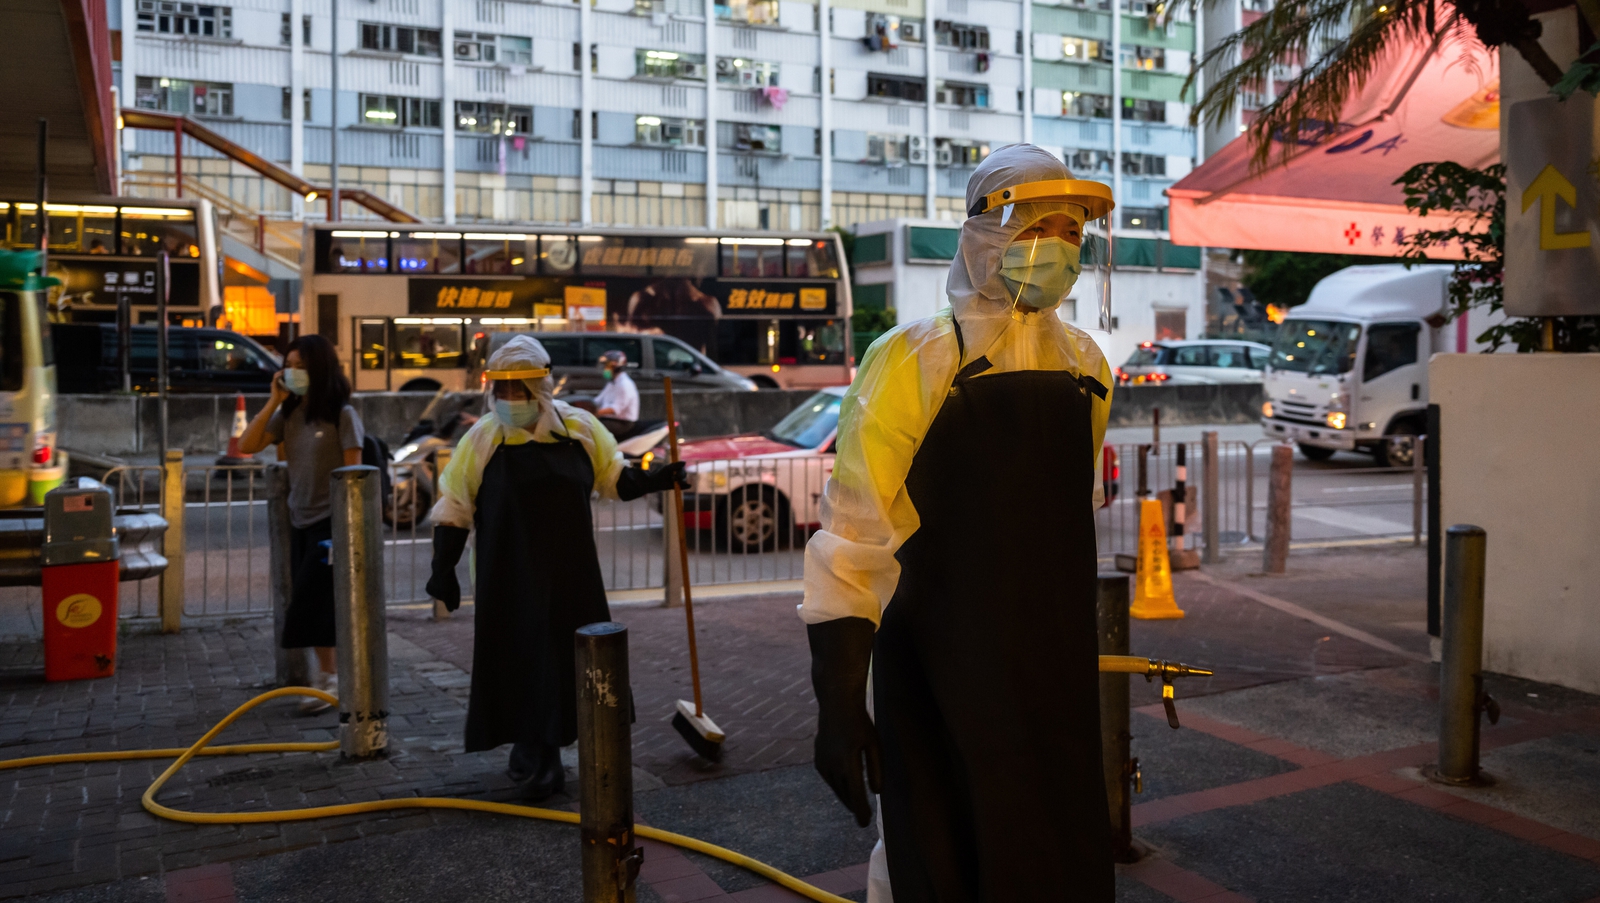 Hong Kong leader says virus spreading 'out of control'